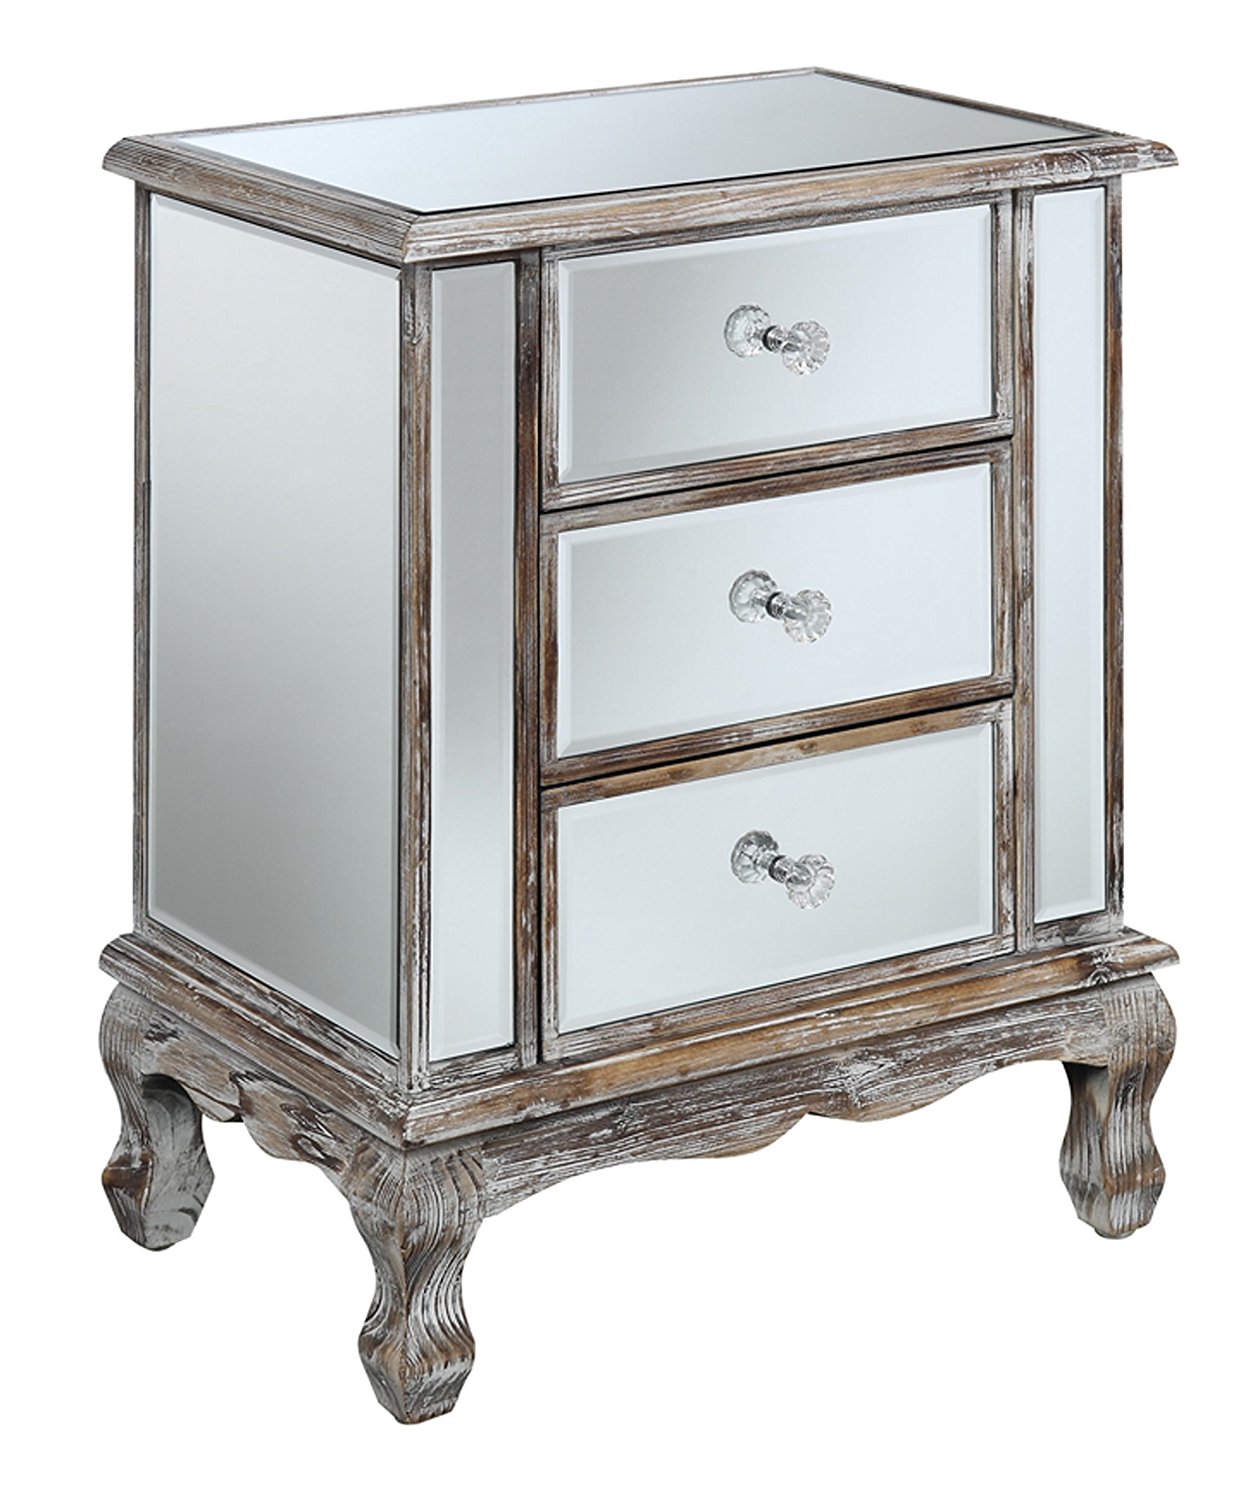 Convenience Concepts Gold Coast Collection 3-Drawer Mirrored End Table, Weathered White/Mirror